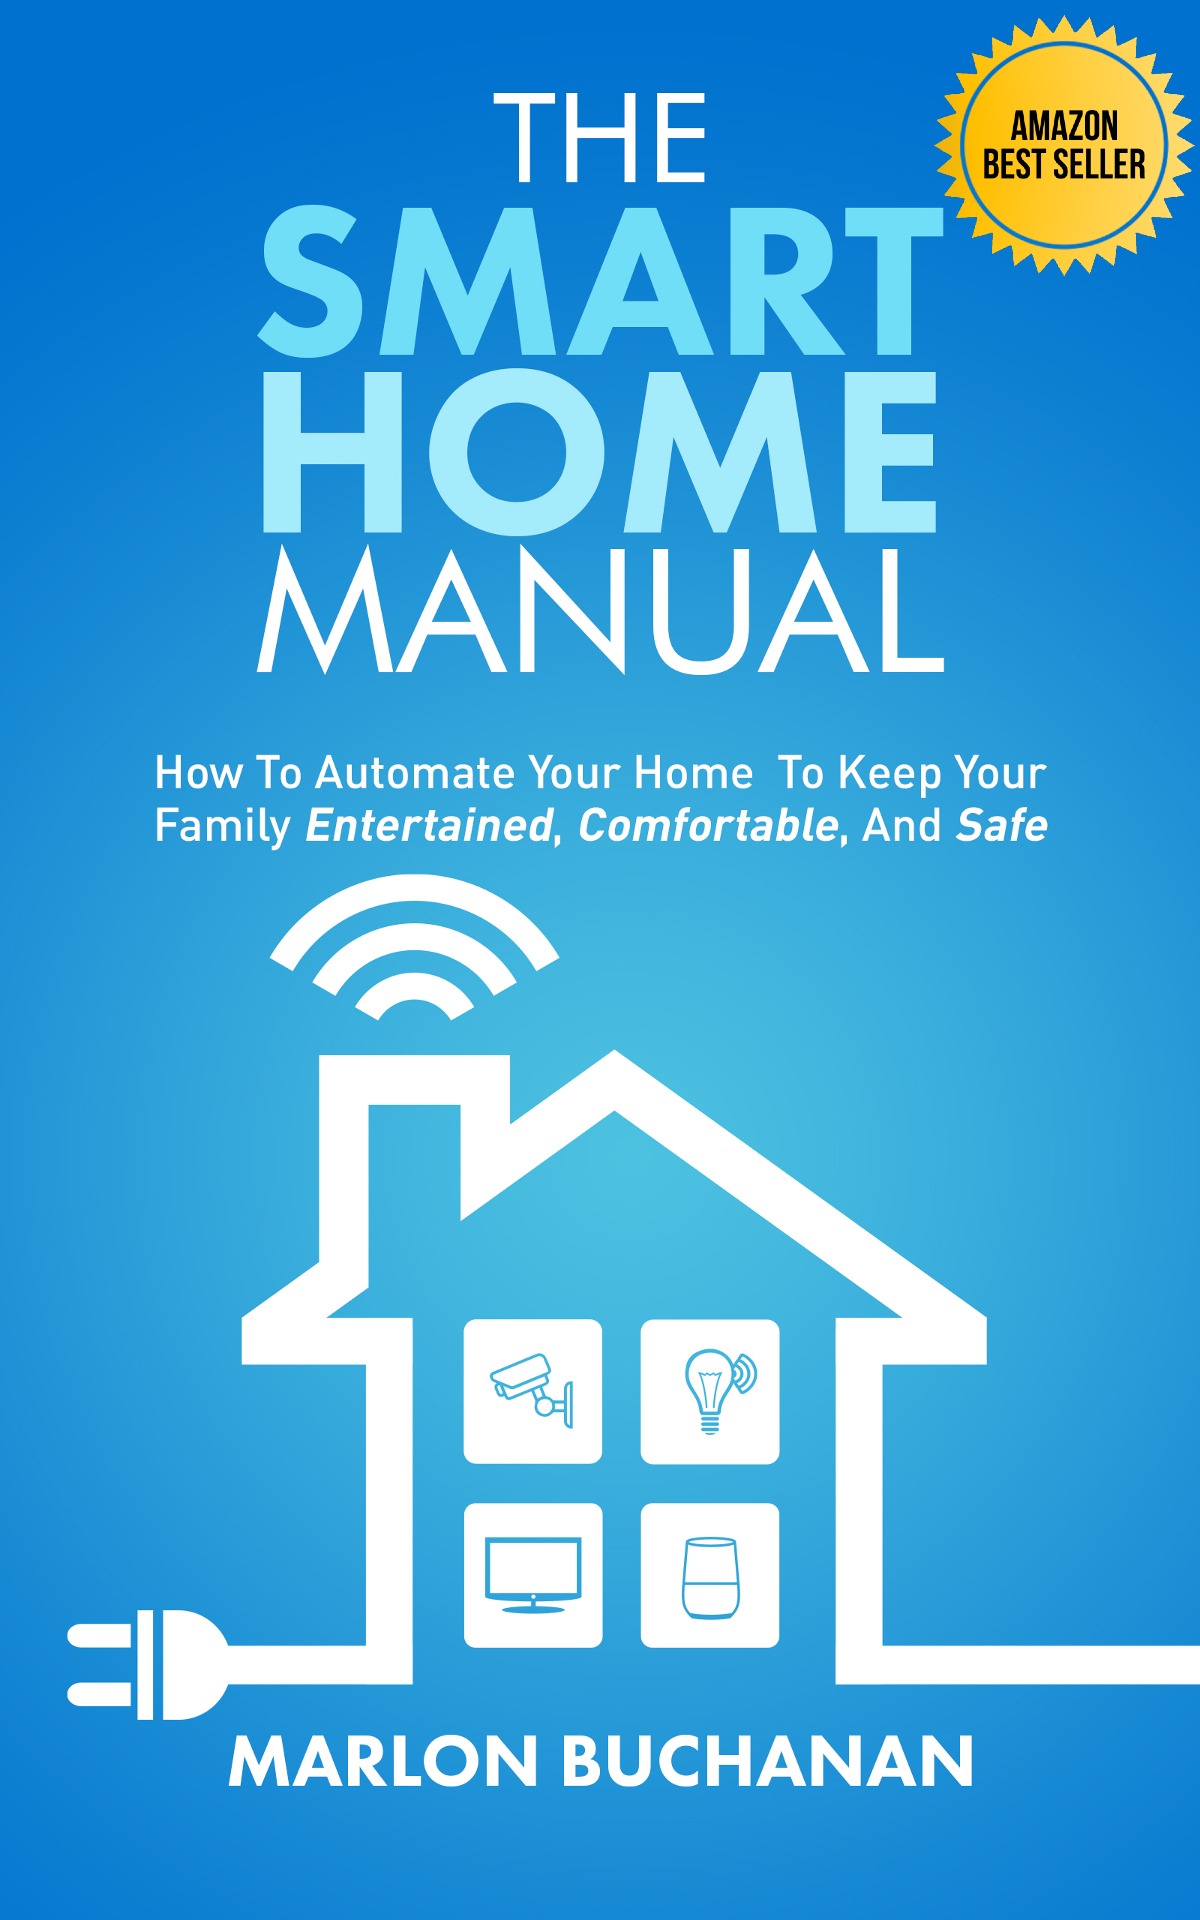 The Smart Home Manual book cover